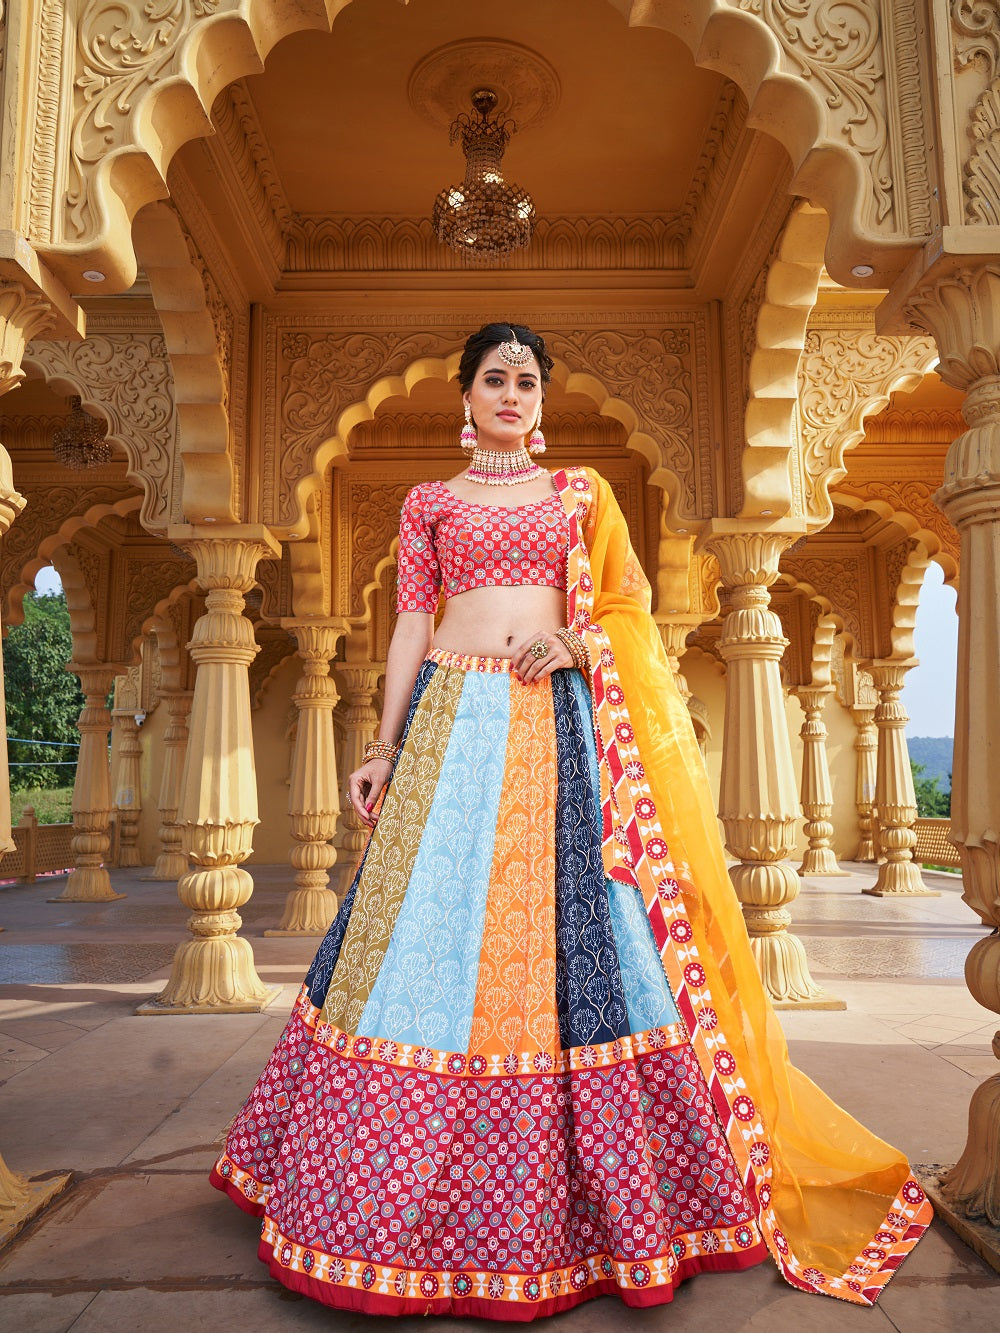 10 Multi-coloured Lehengas that We Can't Take our Eyes Off! | Real Wedding  Stories | Wedding Blog